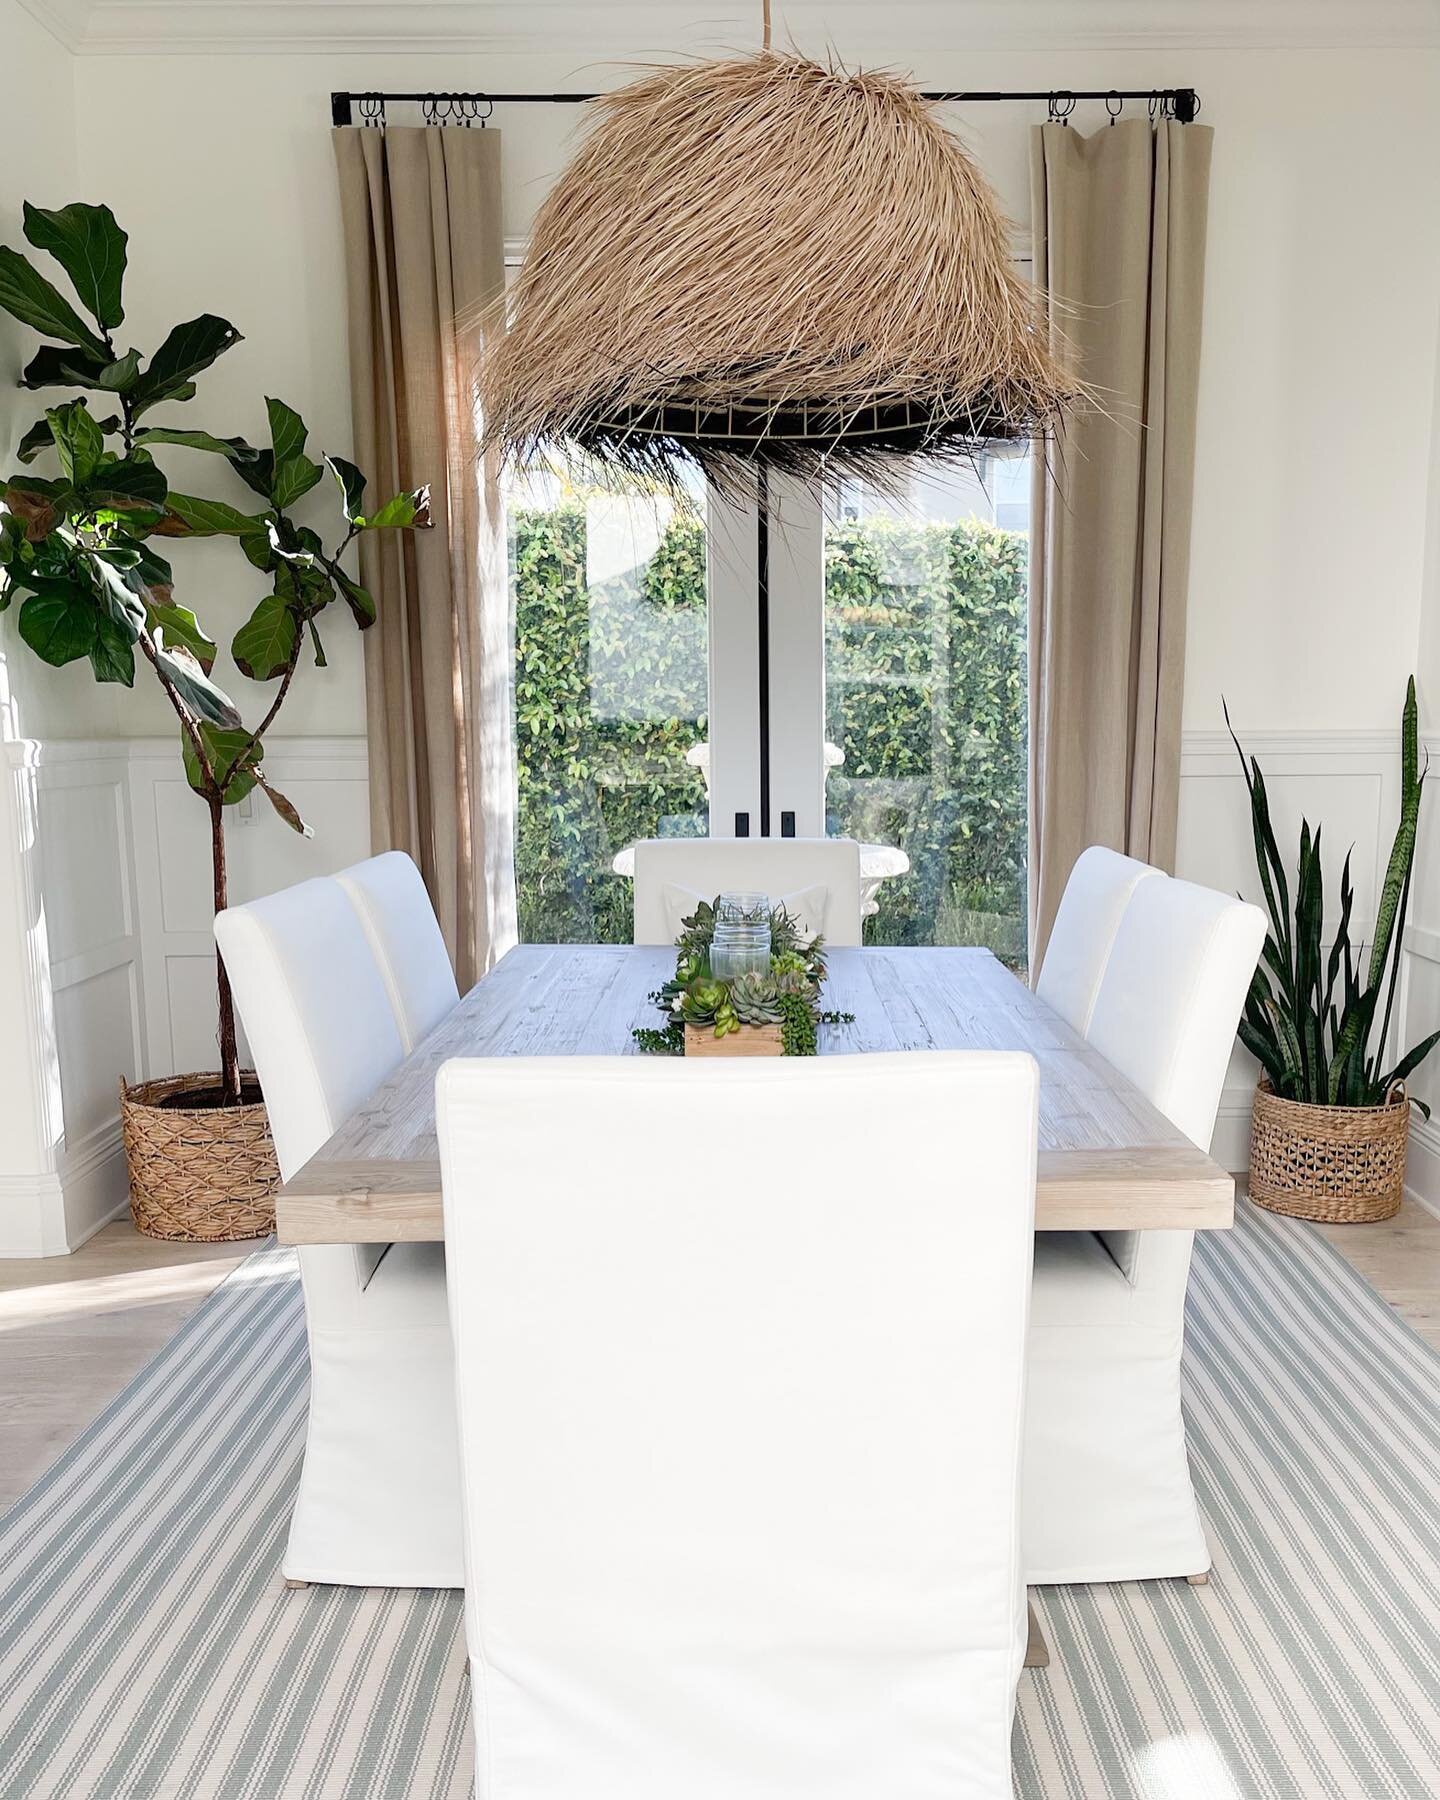 The Suspension Palmier brings the Mediterranean beach inside your home and is sure to leave a lasting impression on your guest! Each pendant is handcrafted and unique. Check out our website @ www.driftwooddesignsbykm.com for sizes and pricing. Design